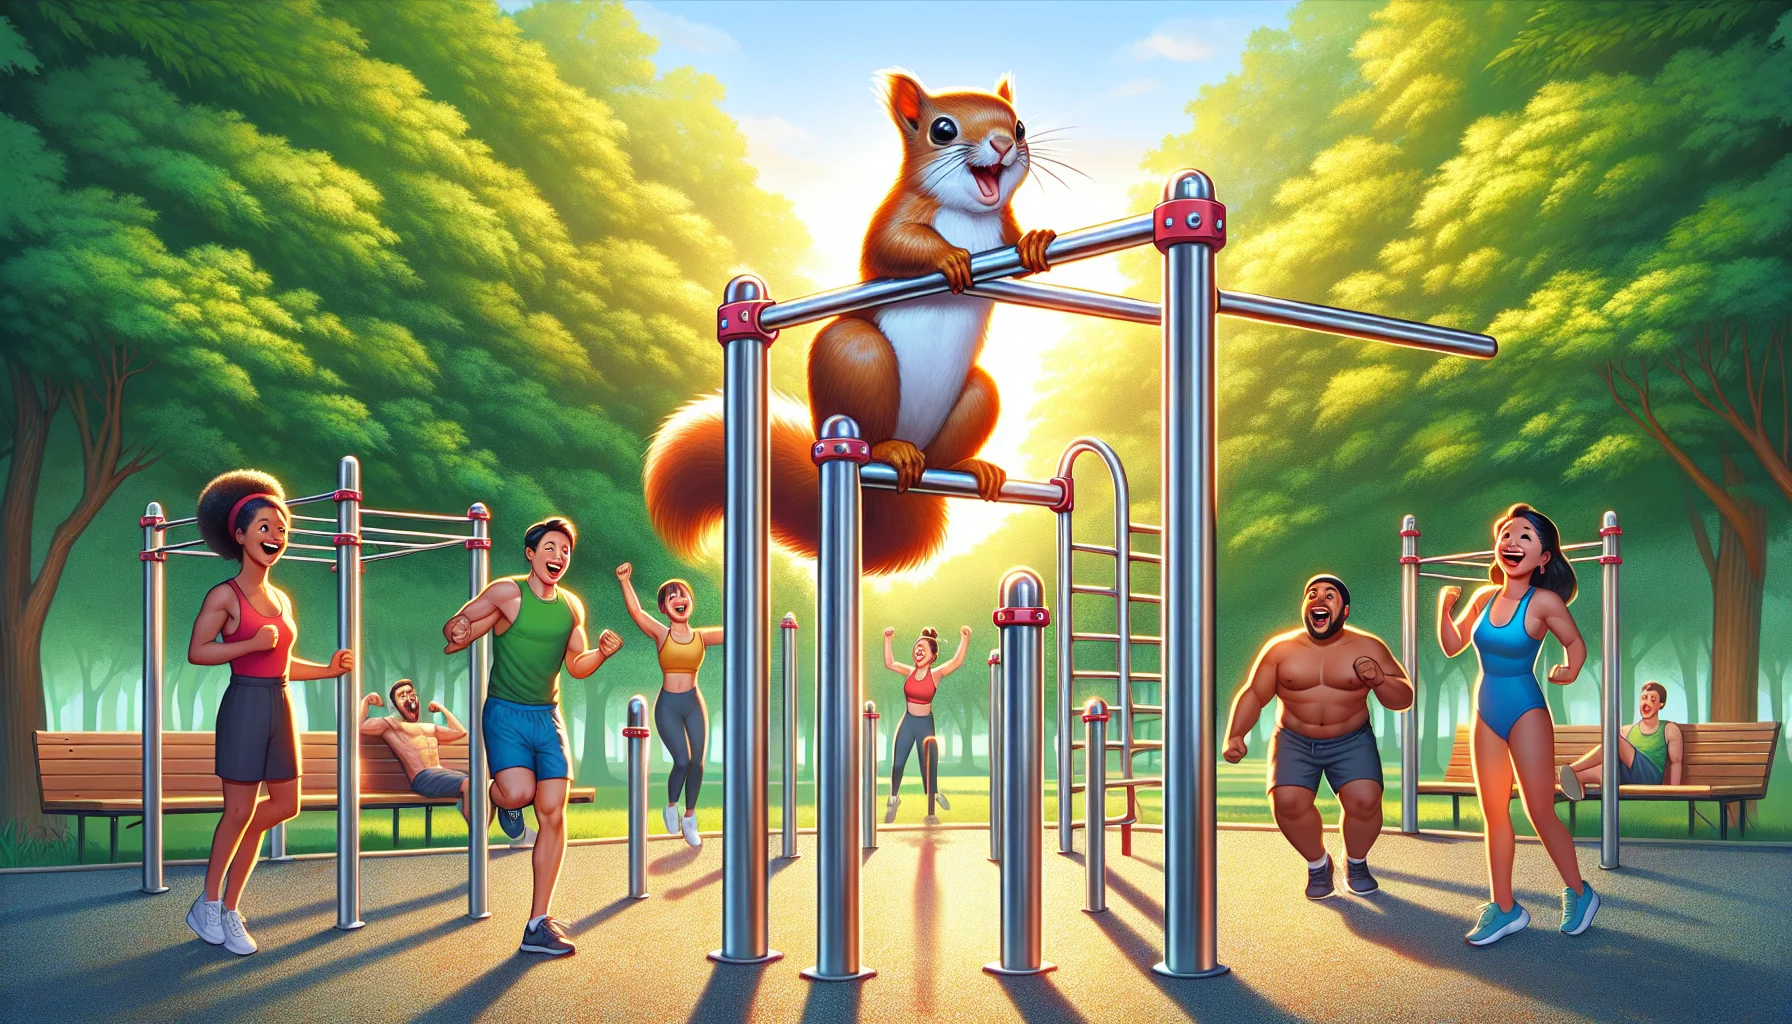 Create an image showing a lively outdoor park. In the center, there's a set of shiny metallic calisthenics bars, catching the sunlight and looking inviting. For a touch of humor, depict an energetic squirrel on the top bar, attempting to do pull-ups with exaggerated effort. Also, include human figures representing diversity, including a Caucasian woman, a Middle-Eastern man, and a South Asian child, all laughing and cheering and preparing to try their turn at the bars. The background is full of lush trees, painting a serene yet exciting scene of outdoor exercise and fun.